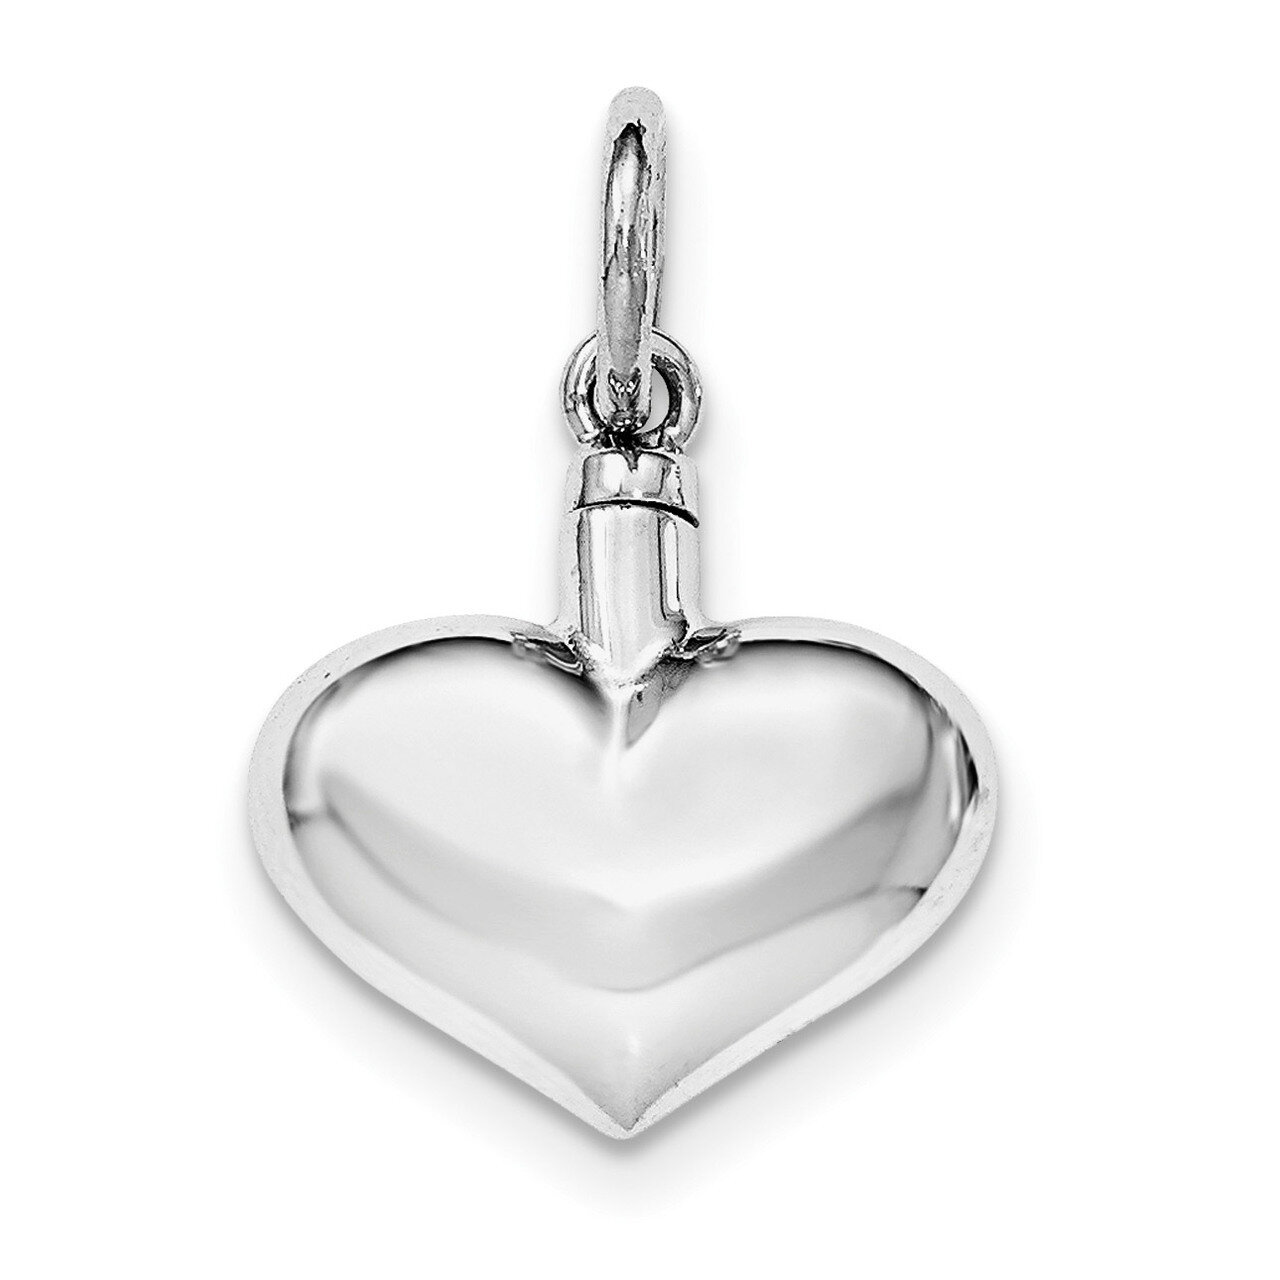 Puffy Heart Ash Holder Pendant Sterling Silver Rhodium-plated Polished QC8400